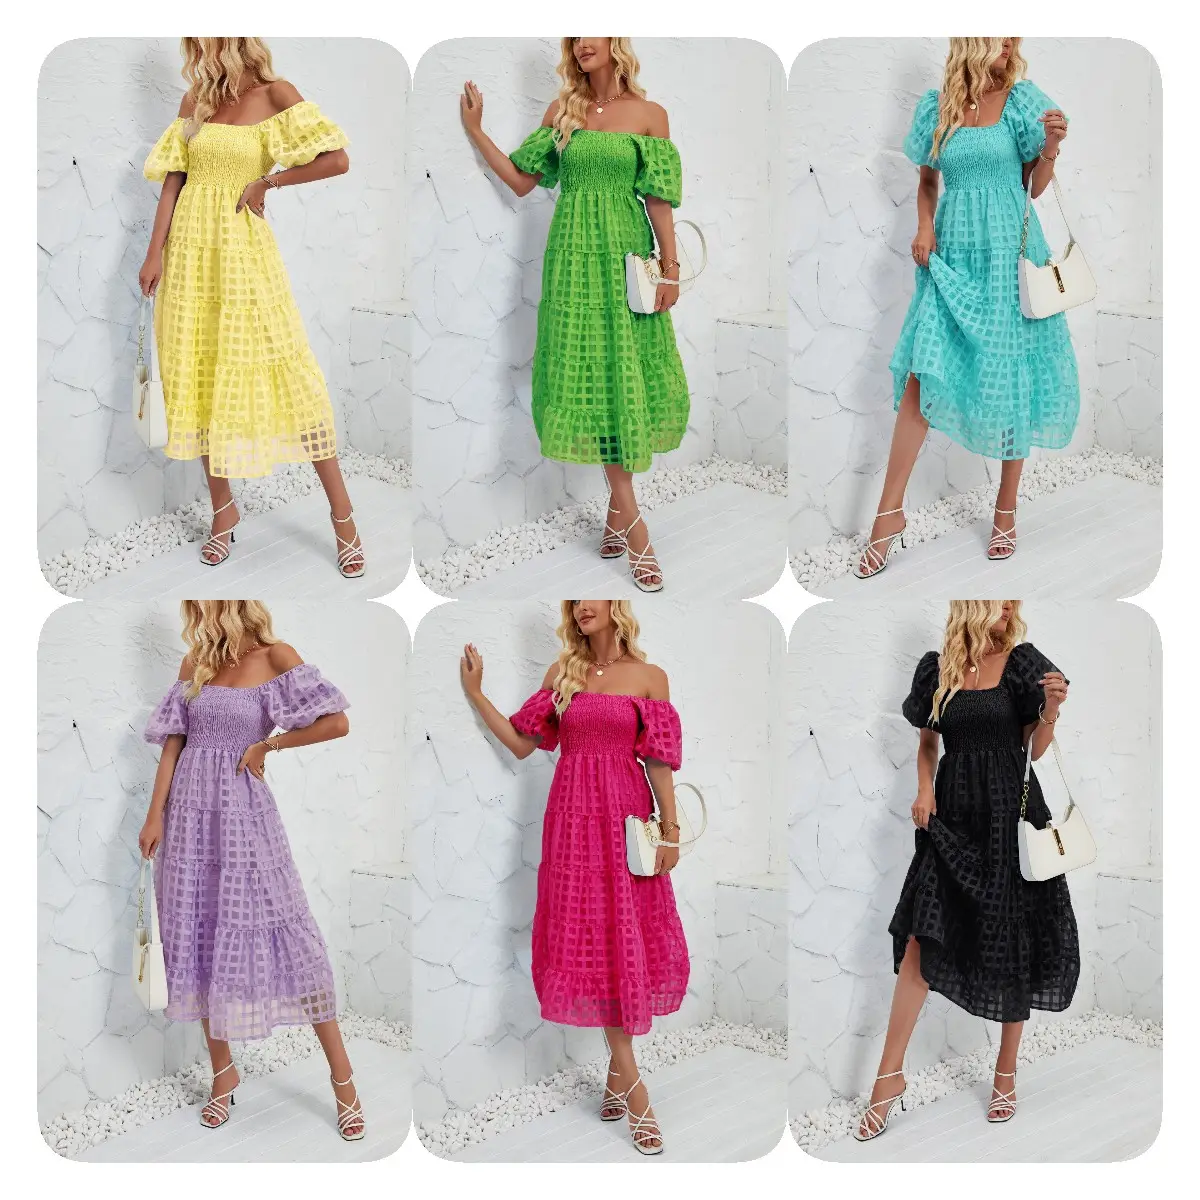 Amazon cross-border summer long dress bubble short sleeves flowing layered beach A-line skirt with lining cloth women